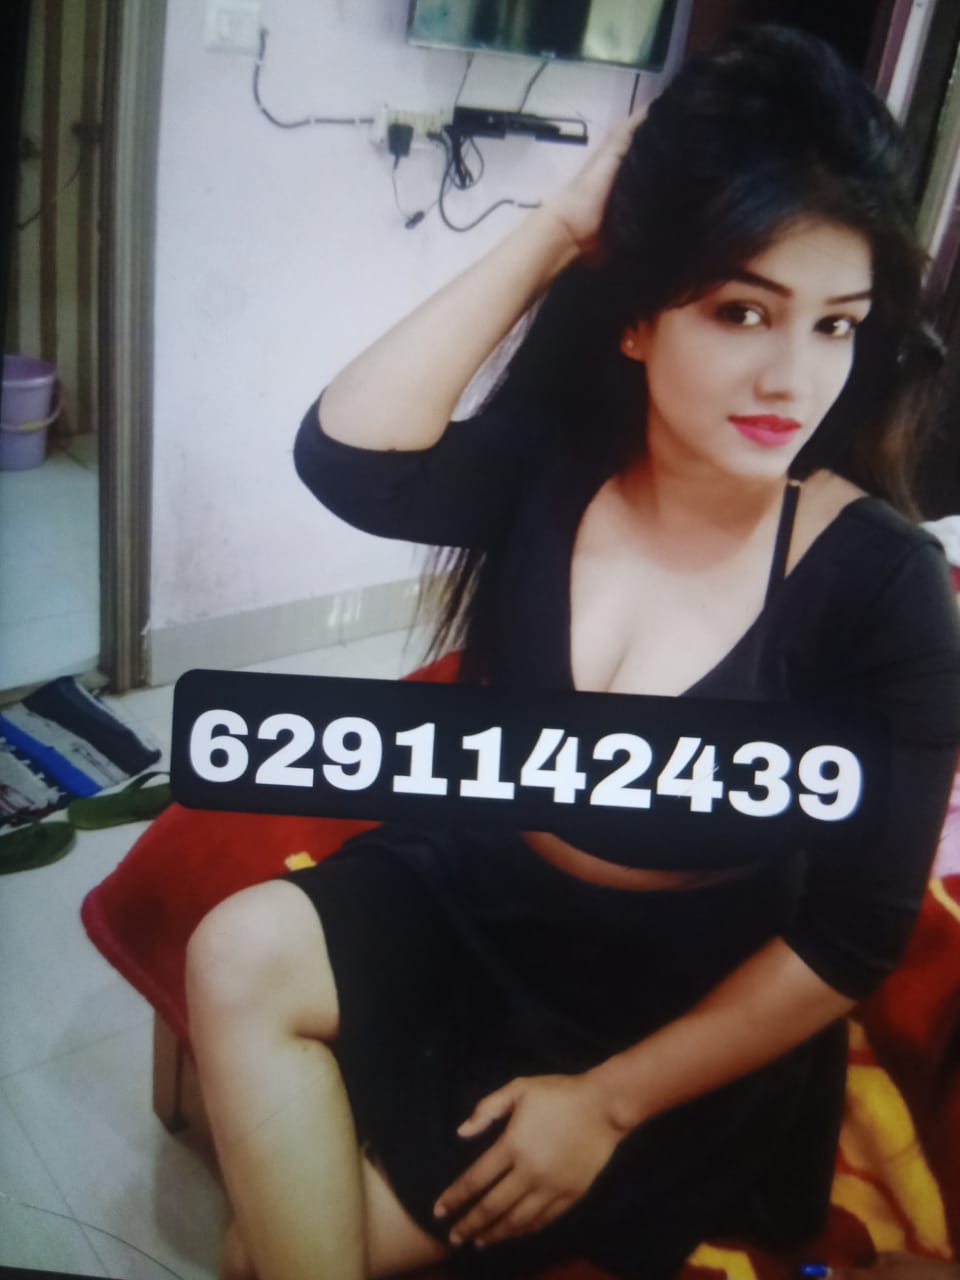 Q profile college girl best service available here for you any time